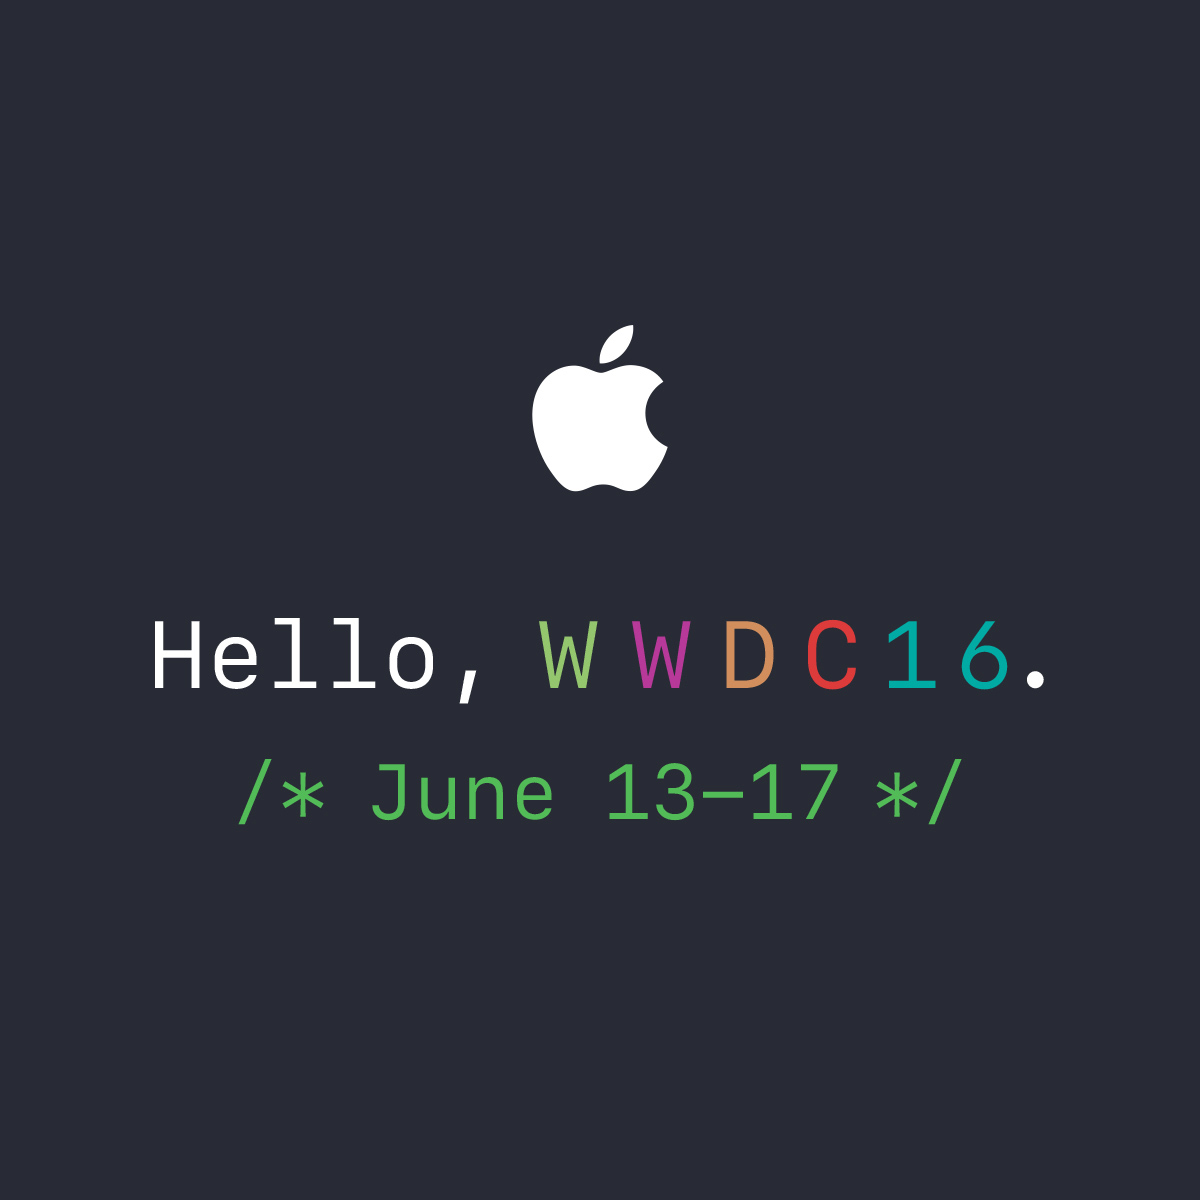 Apple’s annual event Worldwide Developers Conference (WWDC) is right around the corner and the whole world is excited about it.